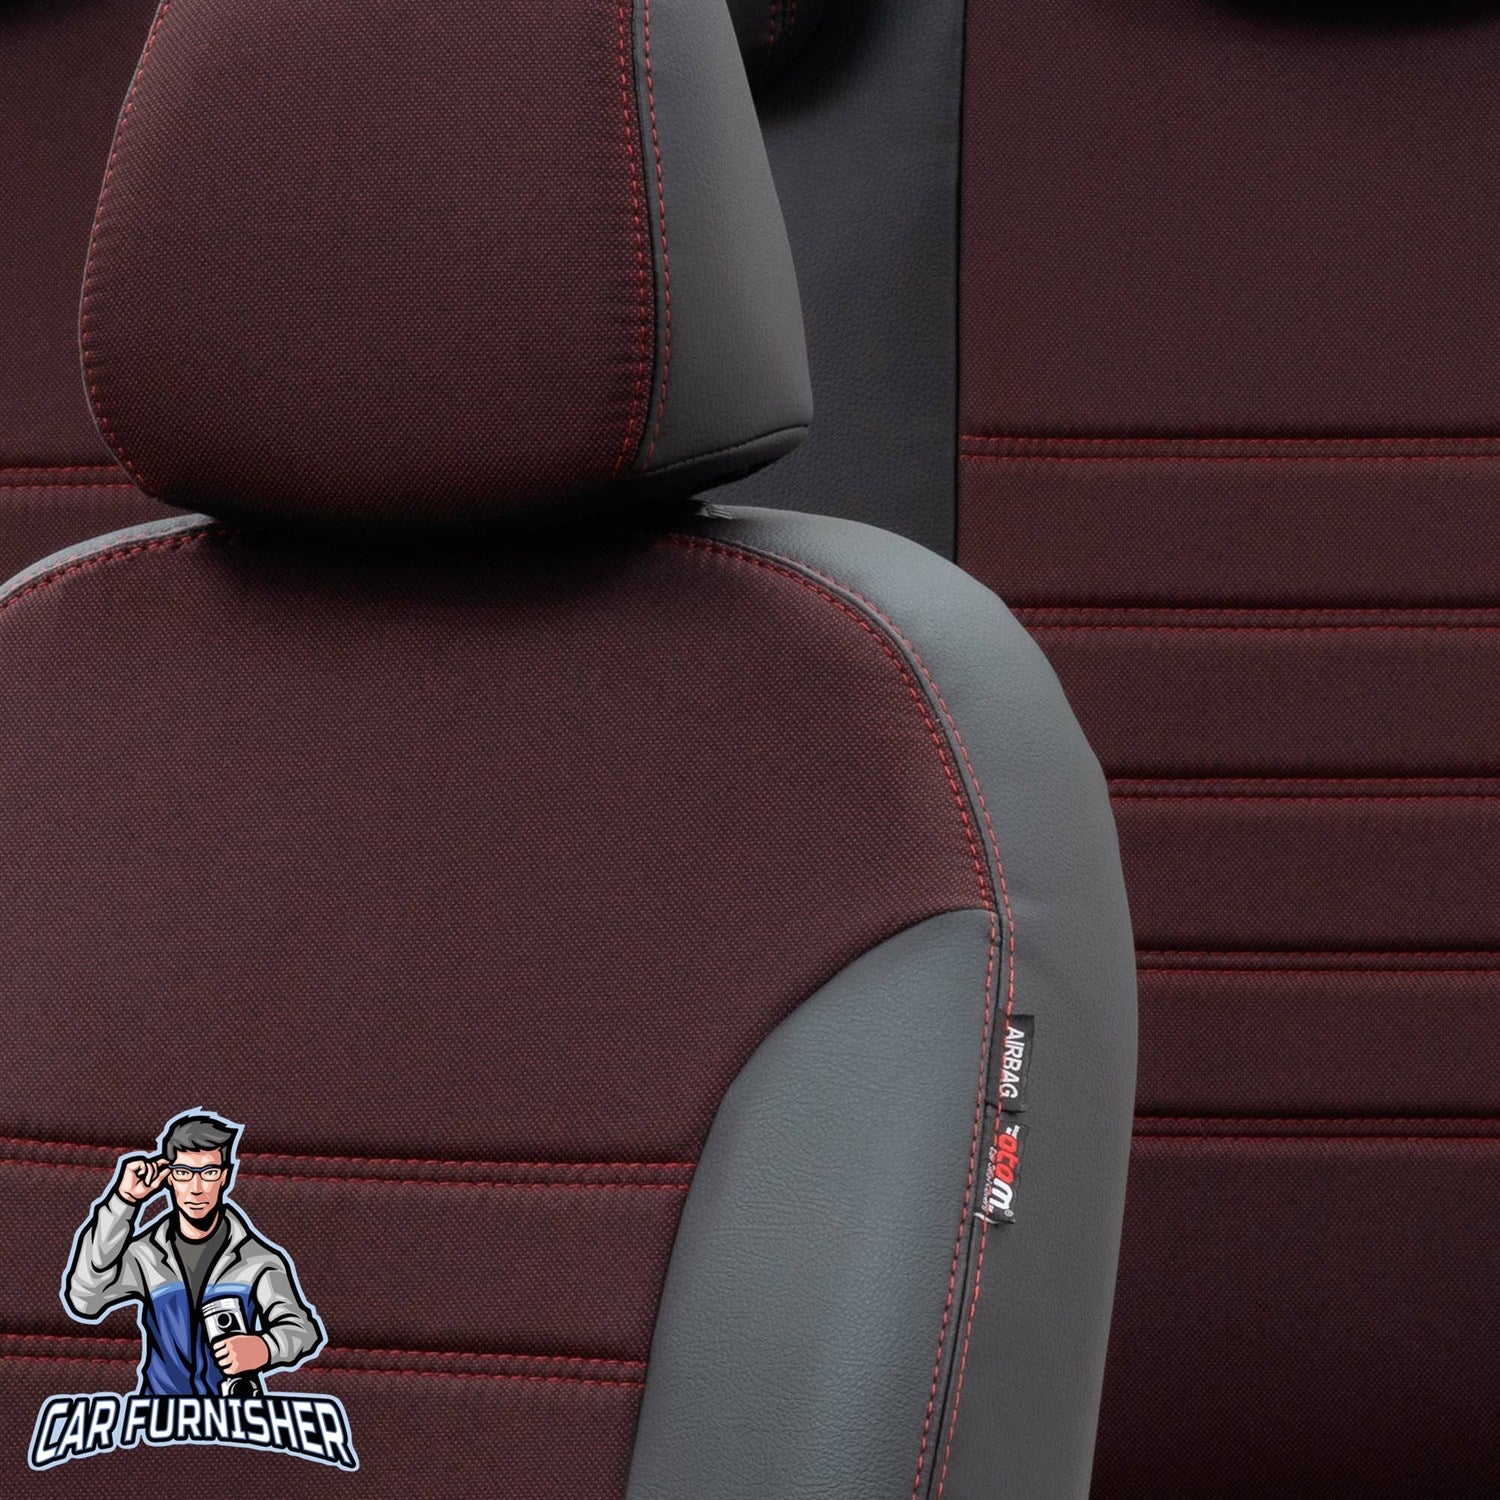 Mercedes B Class Seat Covers Paris Leather & Jacquard Design Red Leather & Jacquard Fabric